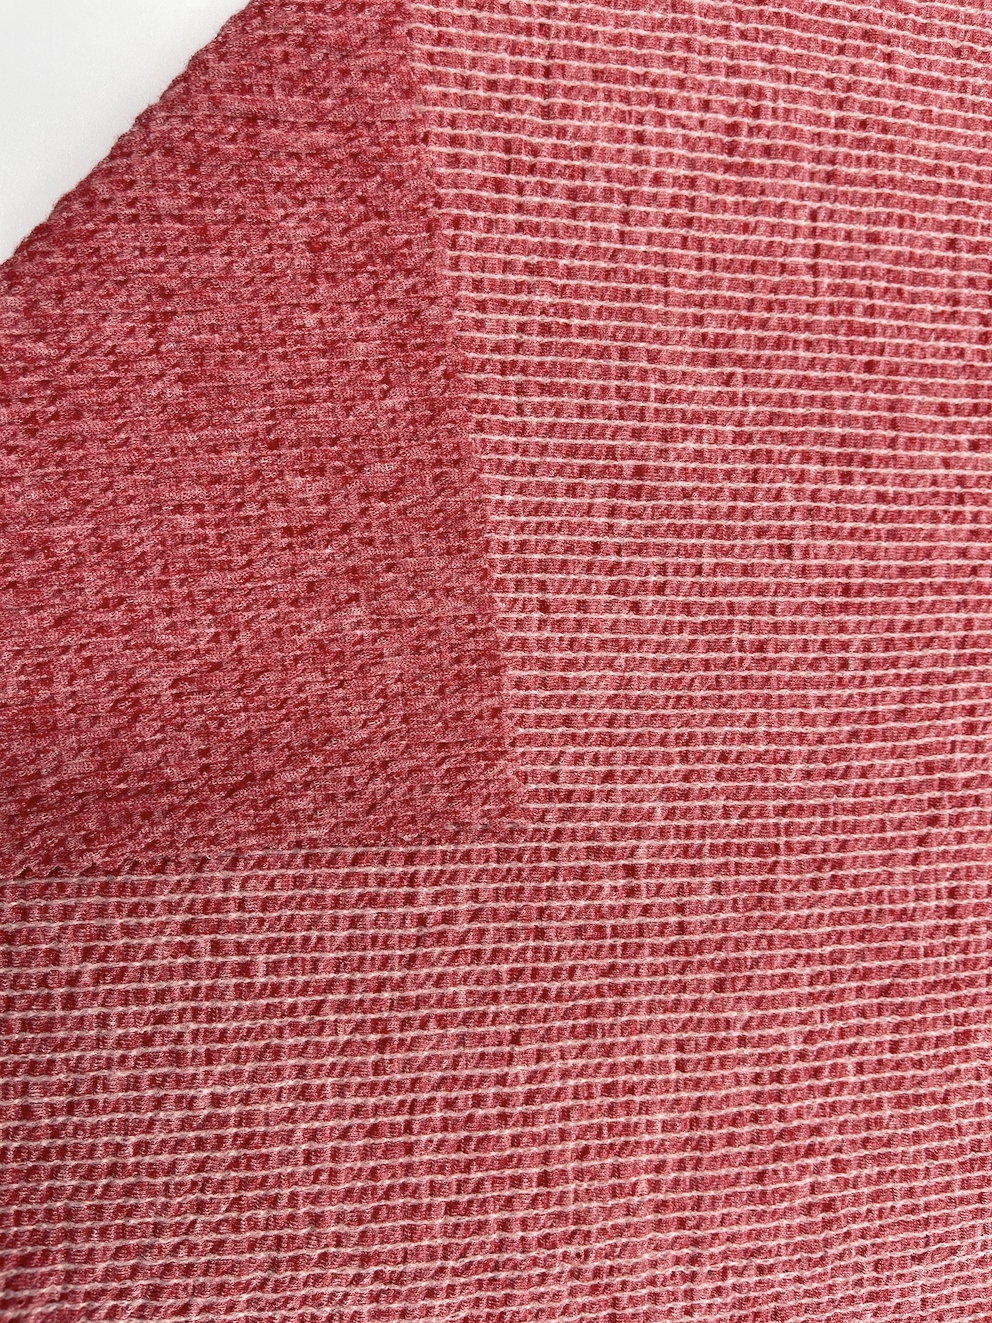 69% Polyester 27% Linen 4% Spandex Texture Fabric